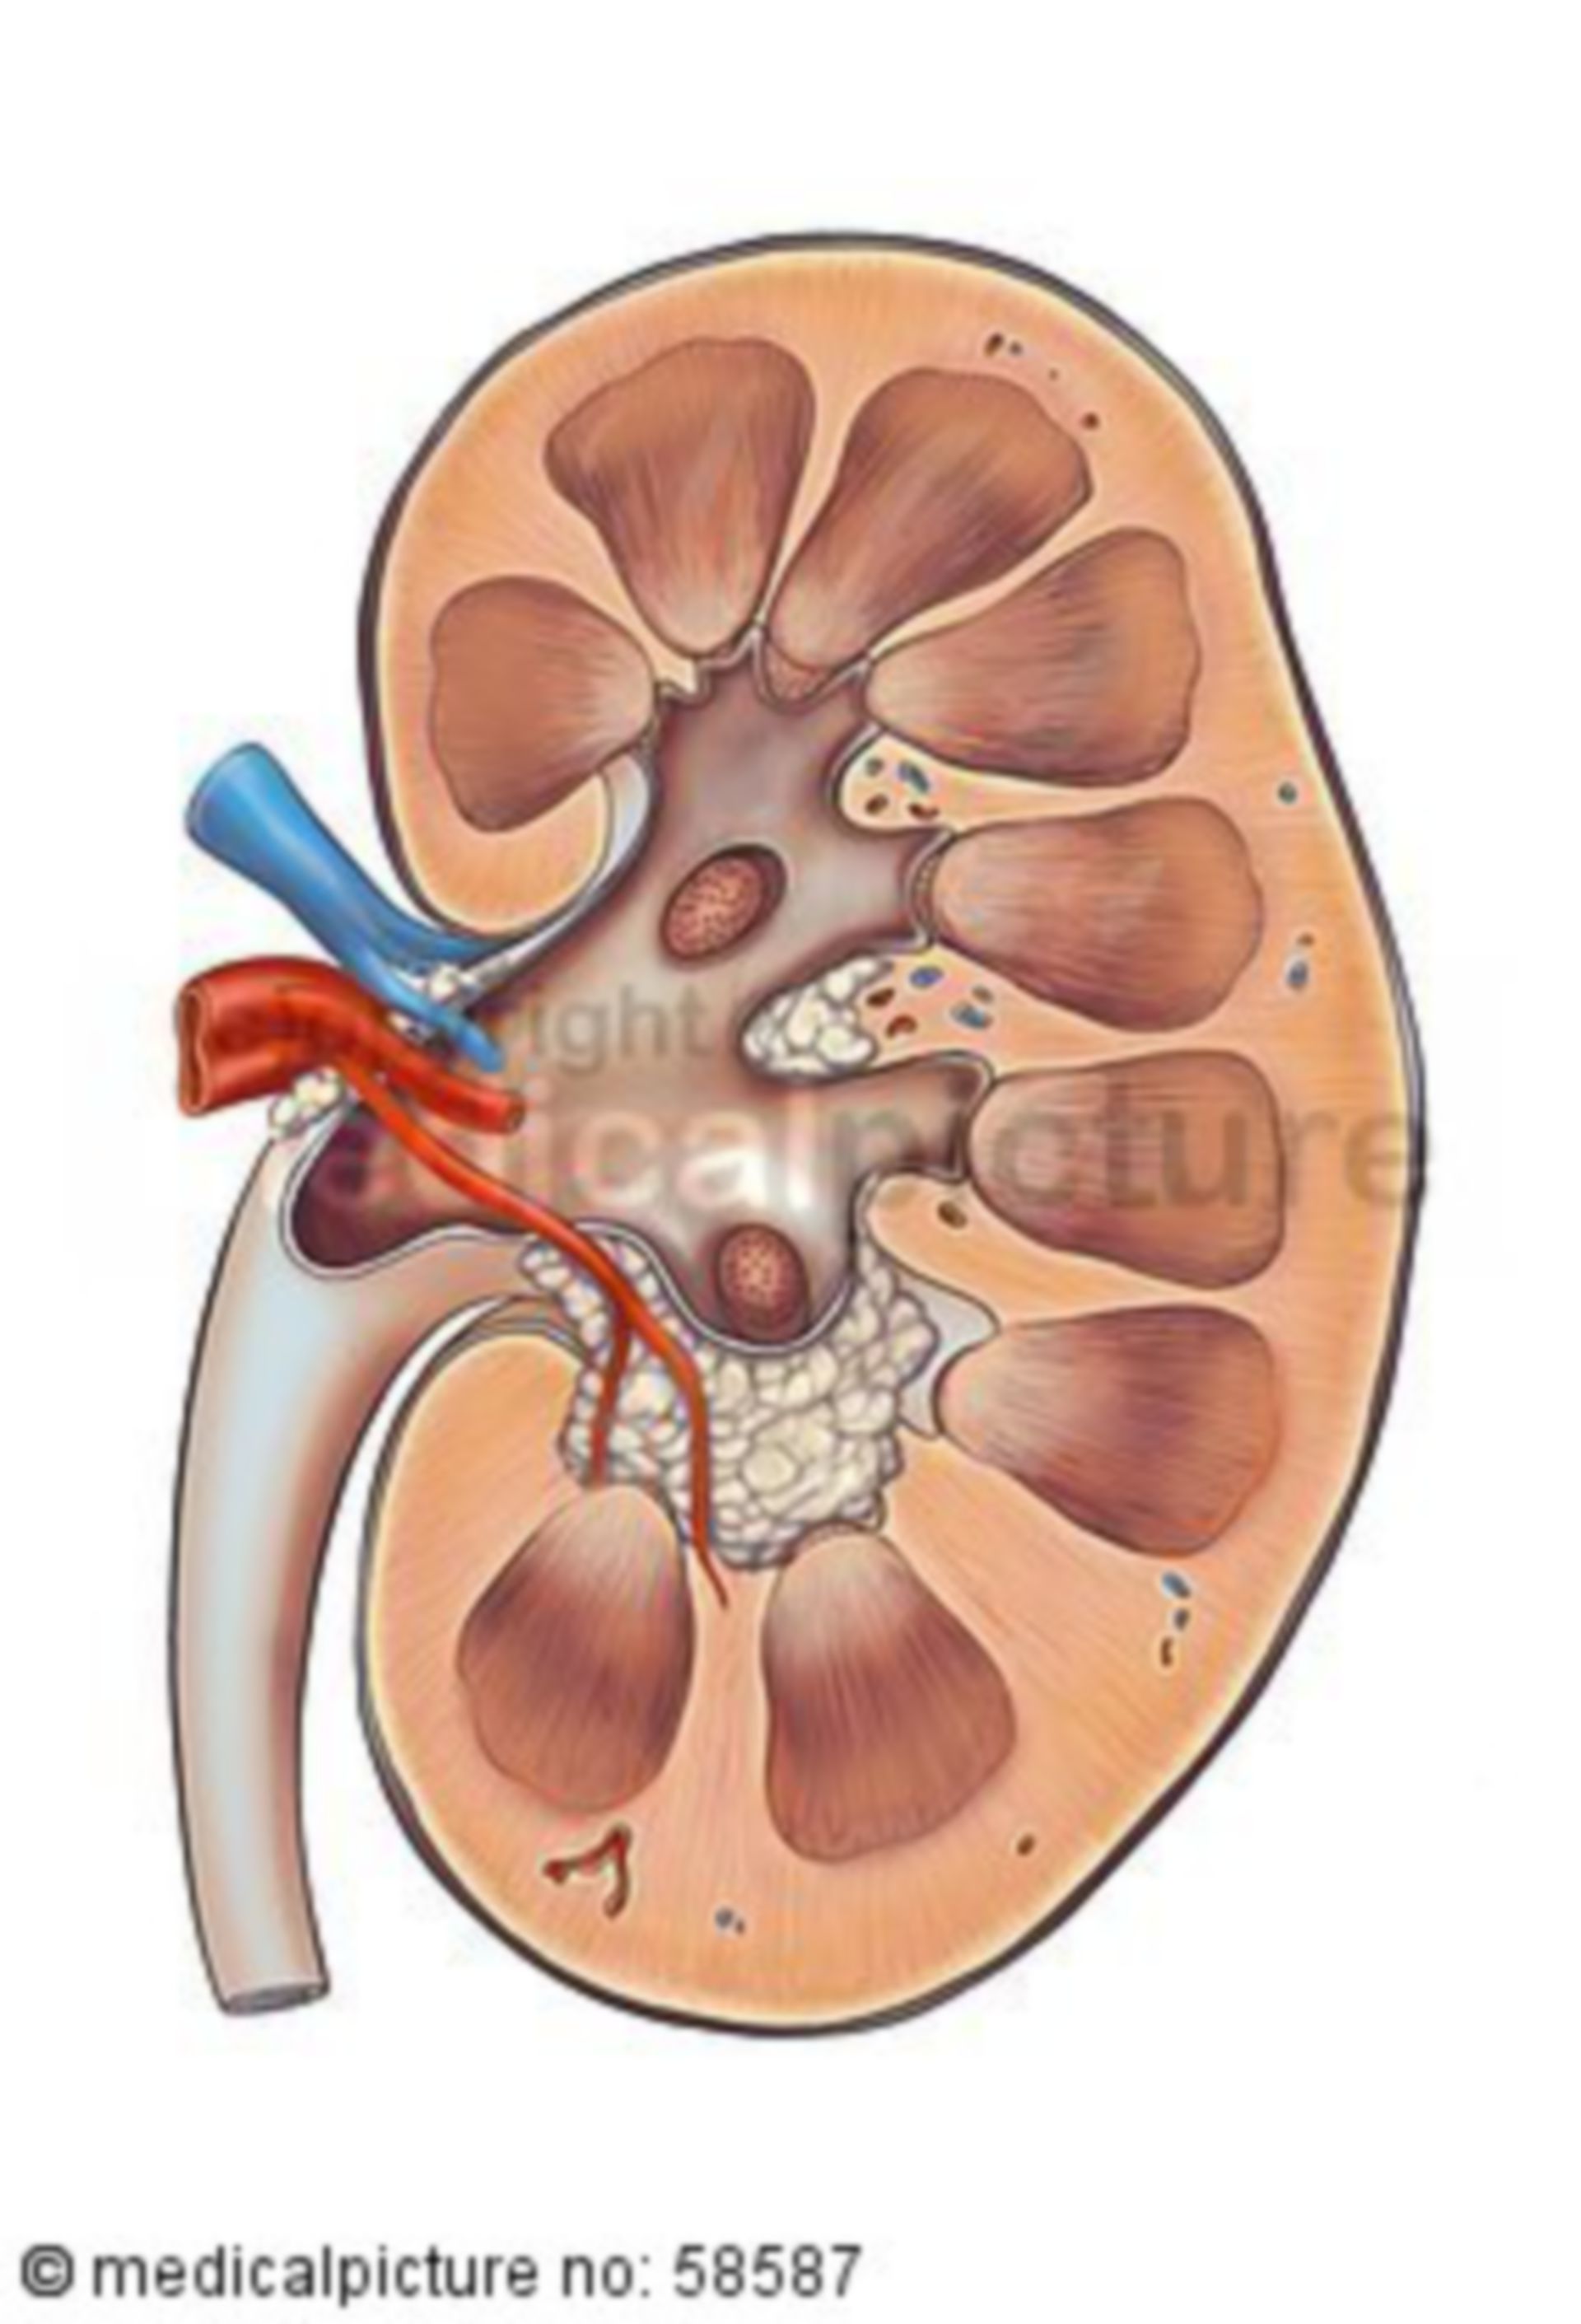 Section of a kidney